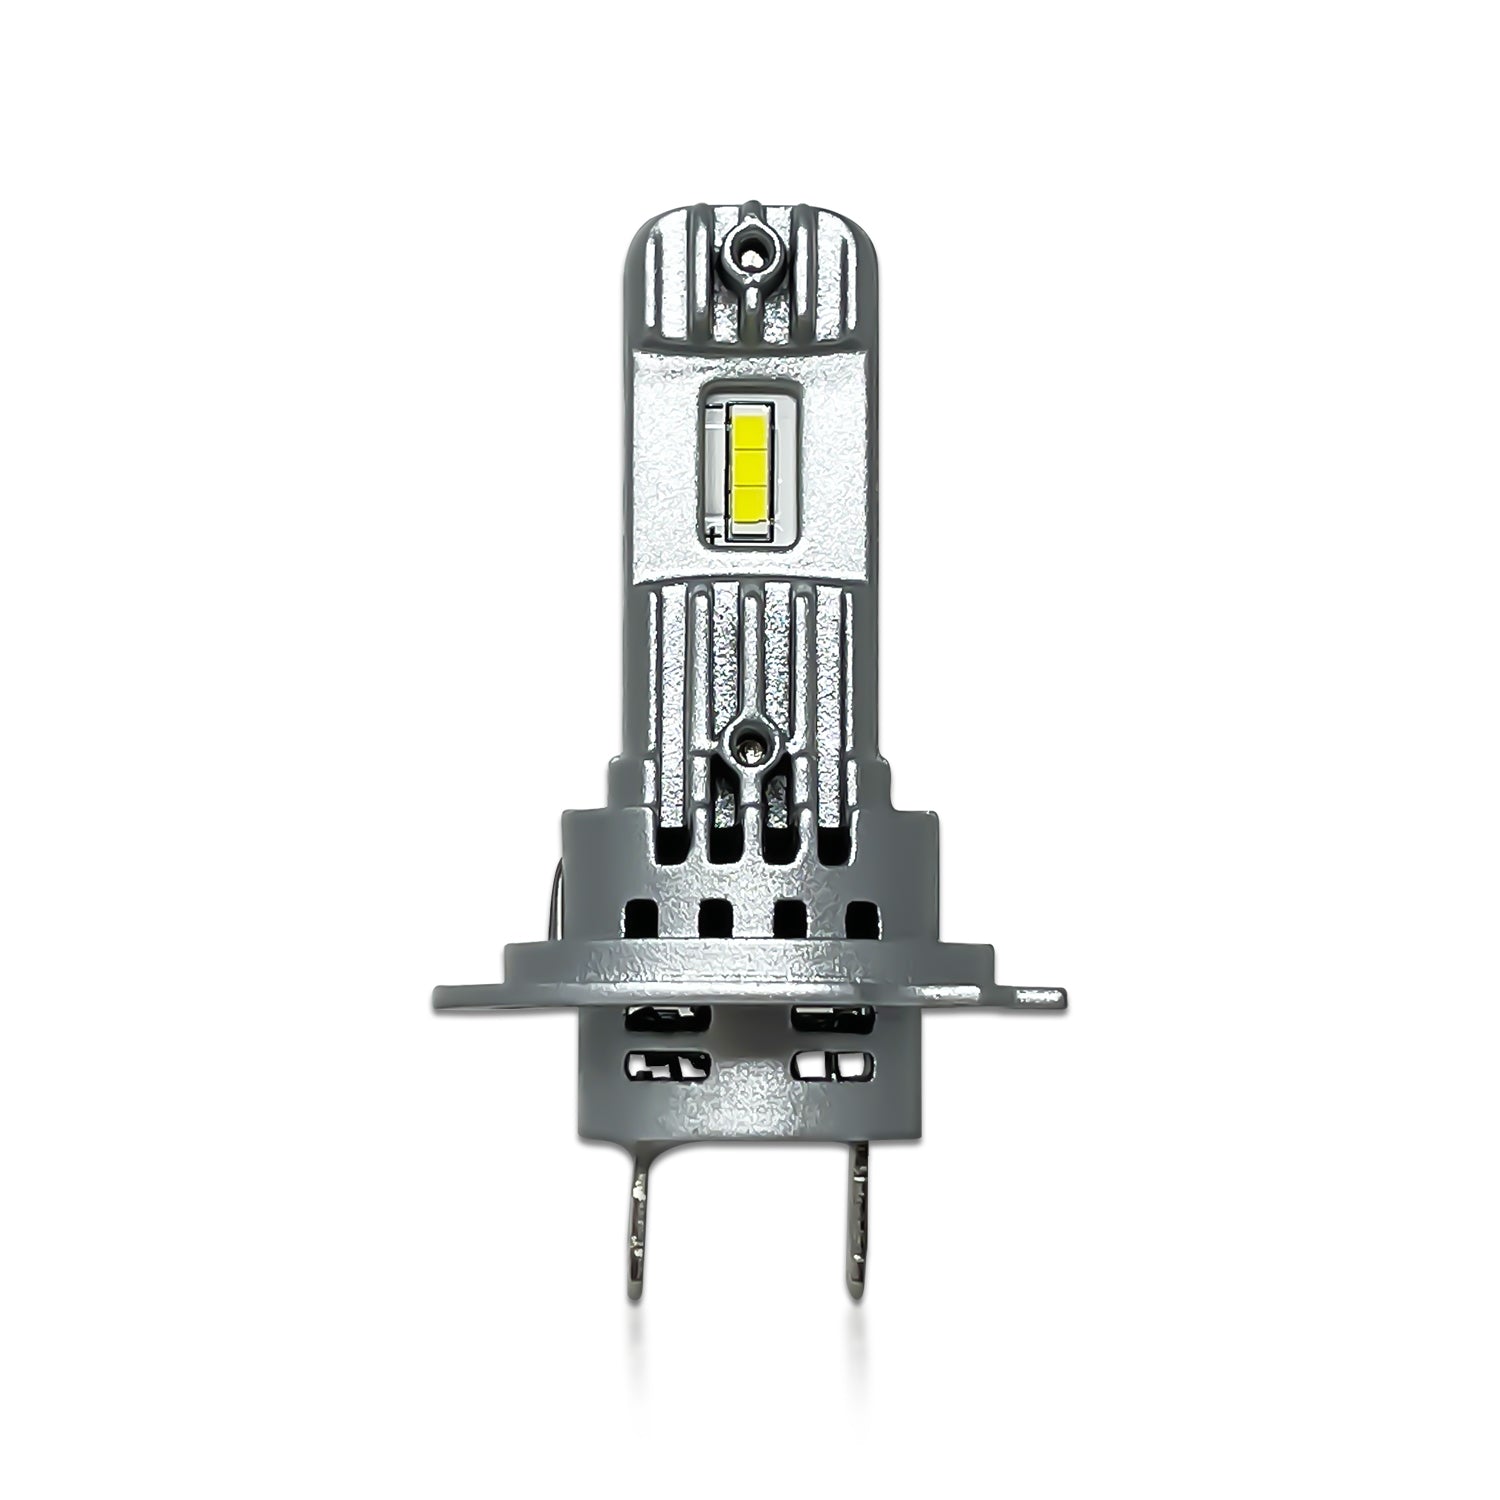  OE-PART LEDriving HL EASY by Osram LED High and Low Beam  Automotive Lighting Lamp 64210DWESY (H7/H18) : Automotive